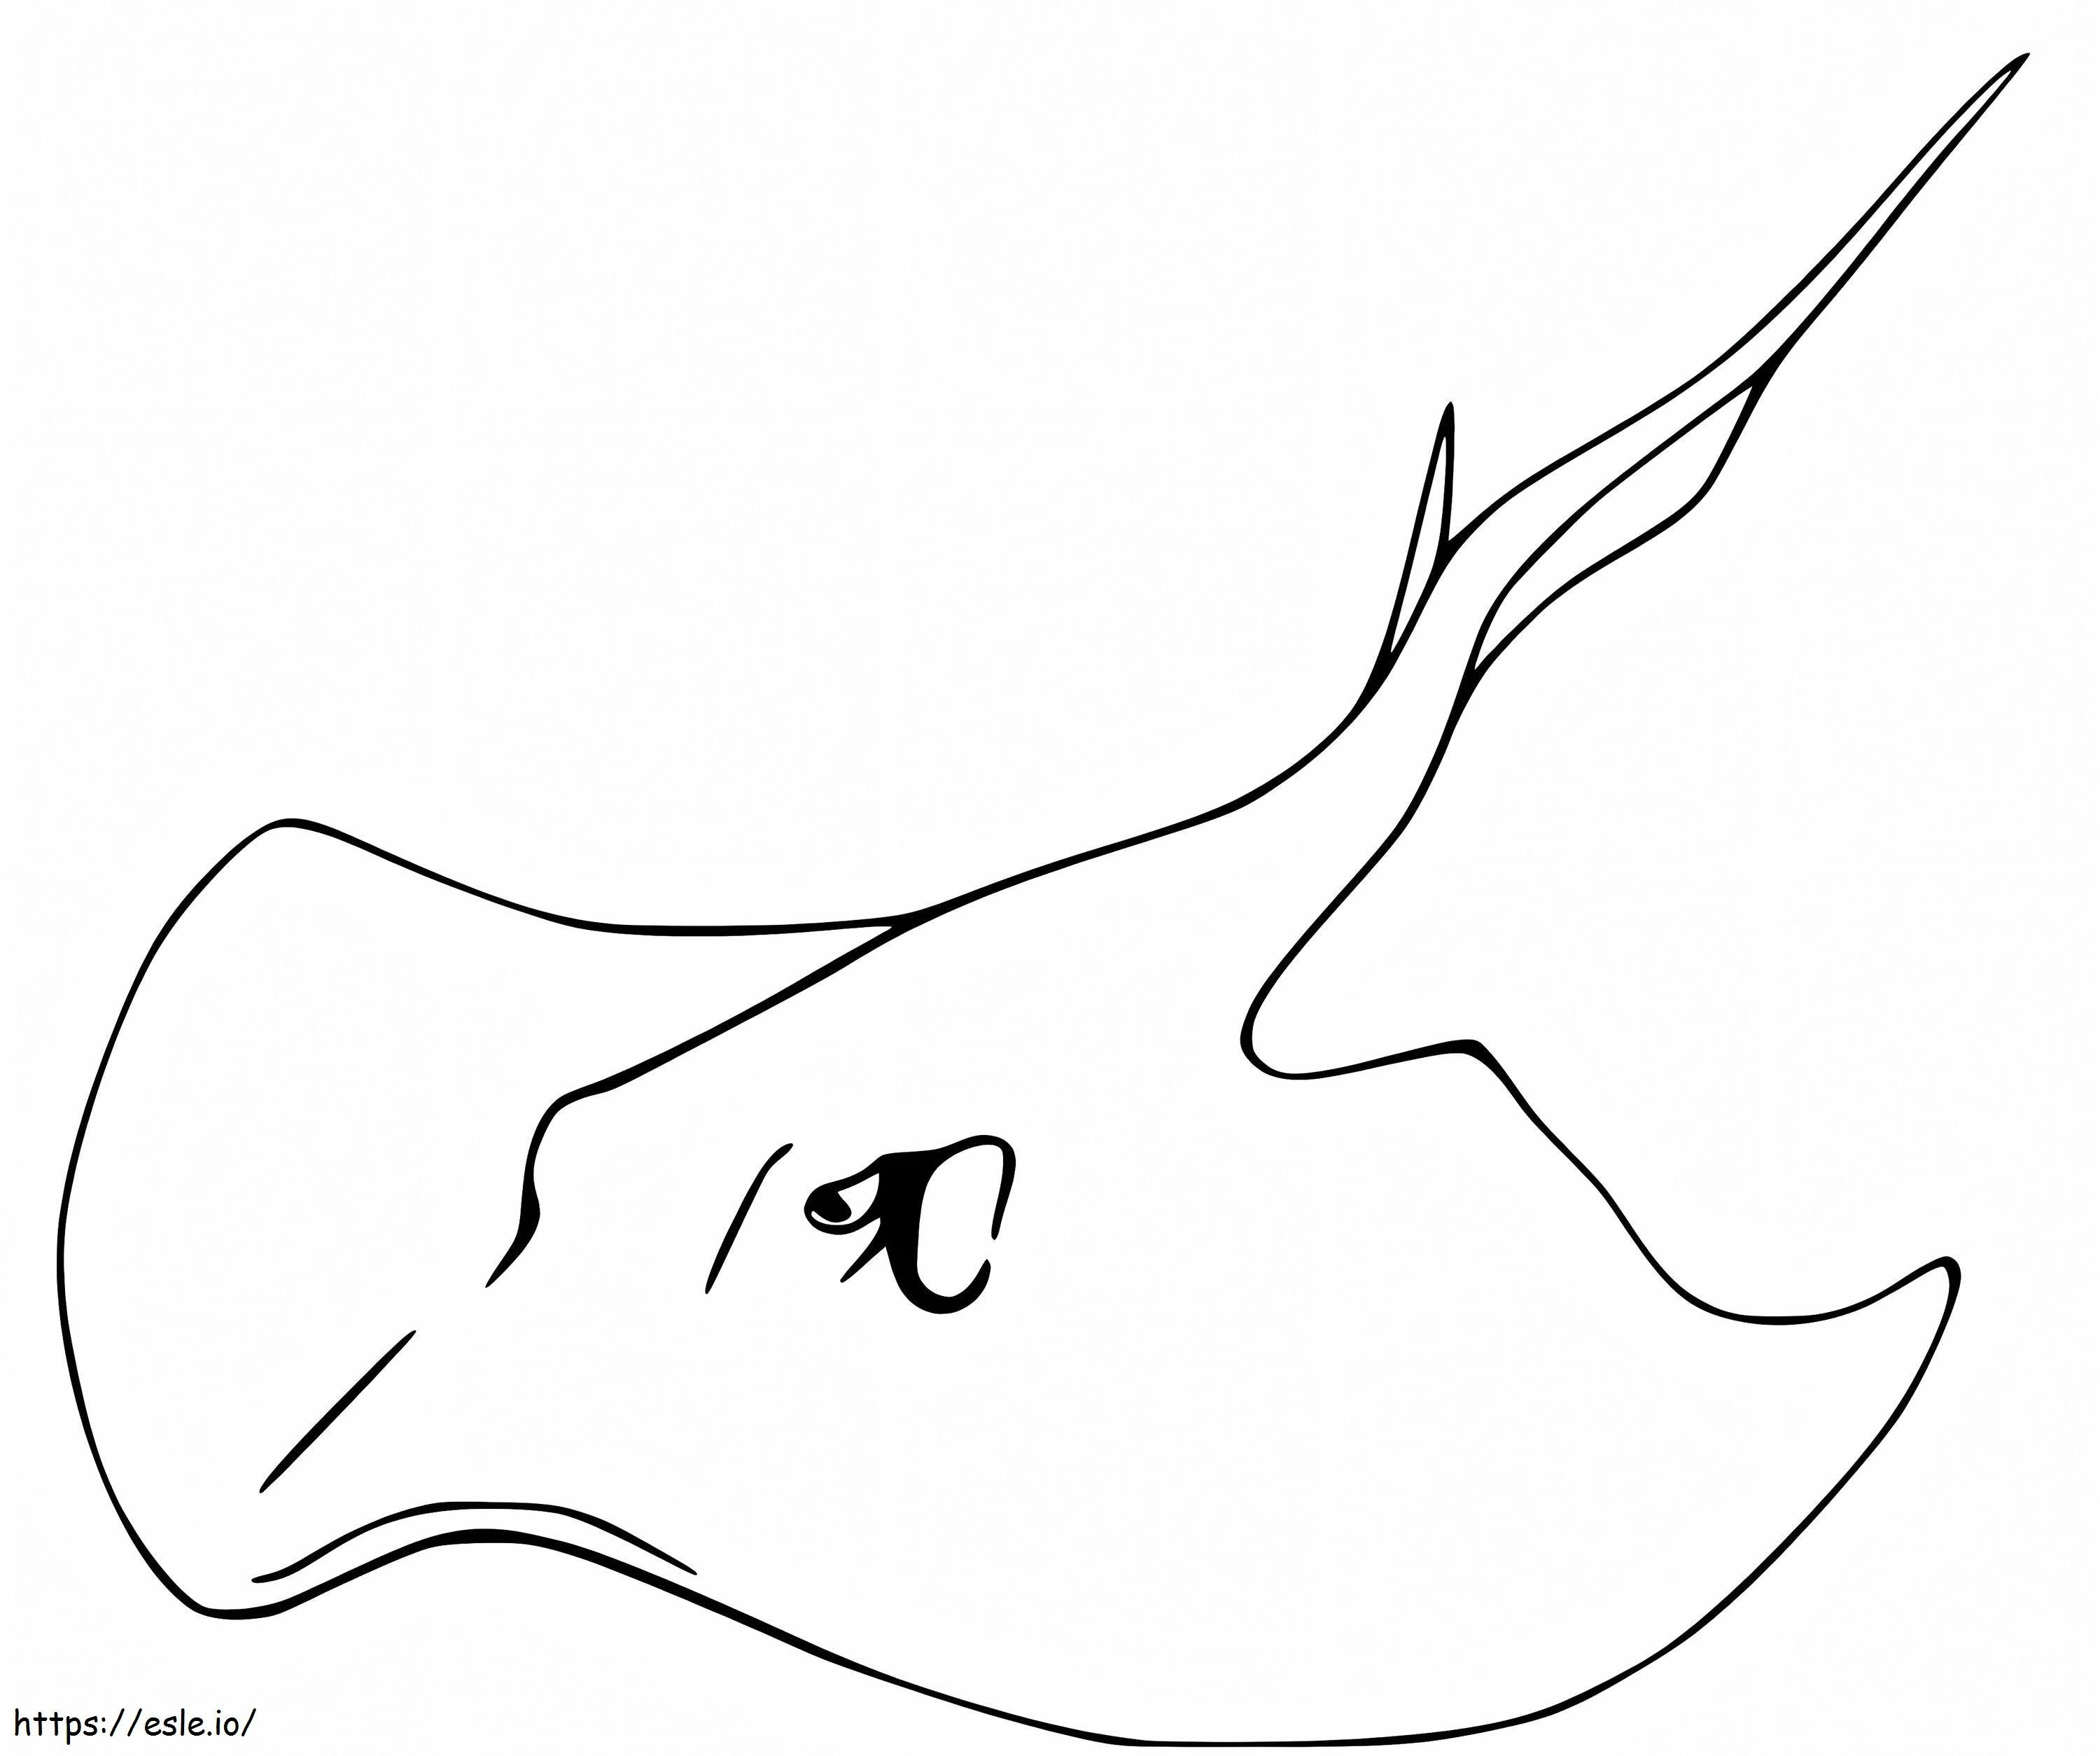 Short Tail Stingray coloring page